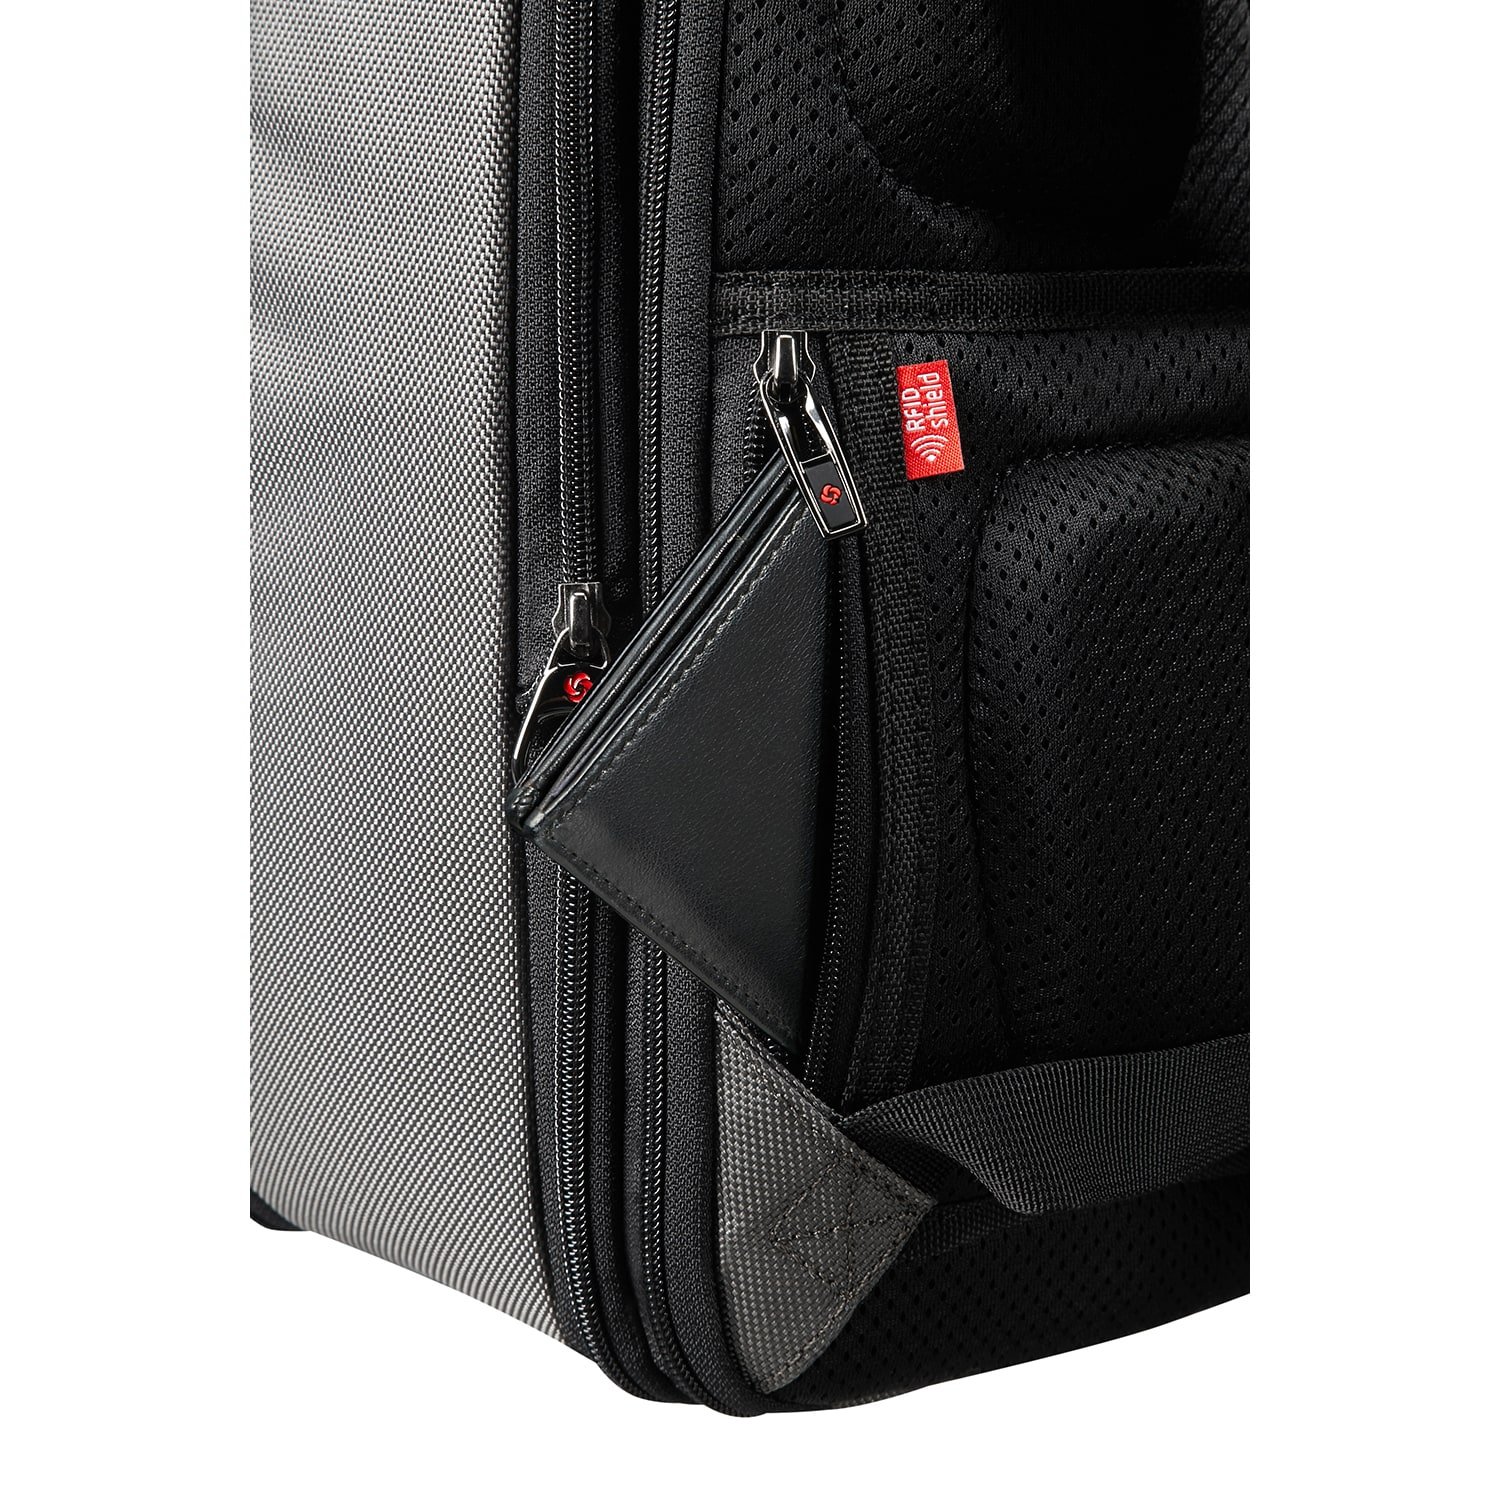 PRO-DLX 5-LAPT.BACKPACK 15.6'' EXP SCG7-008-SF000*08